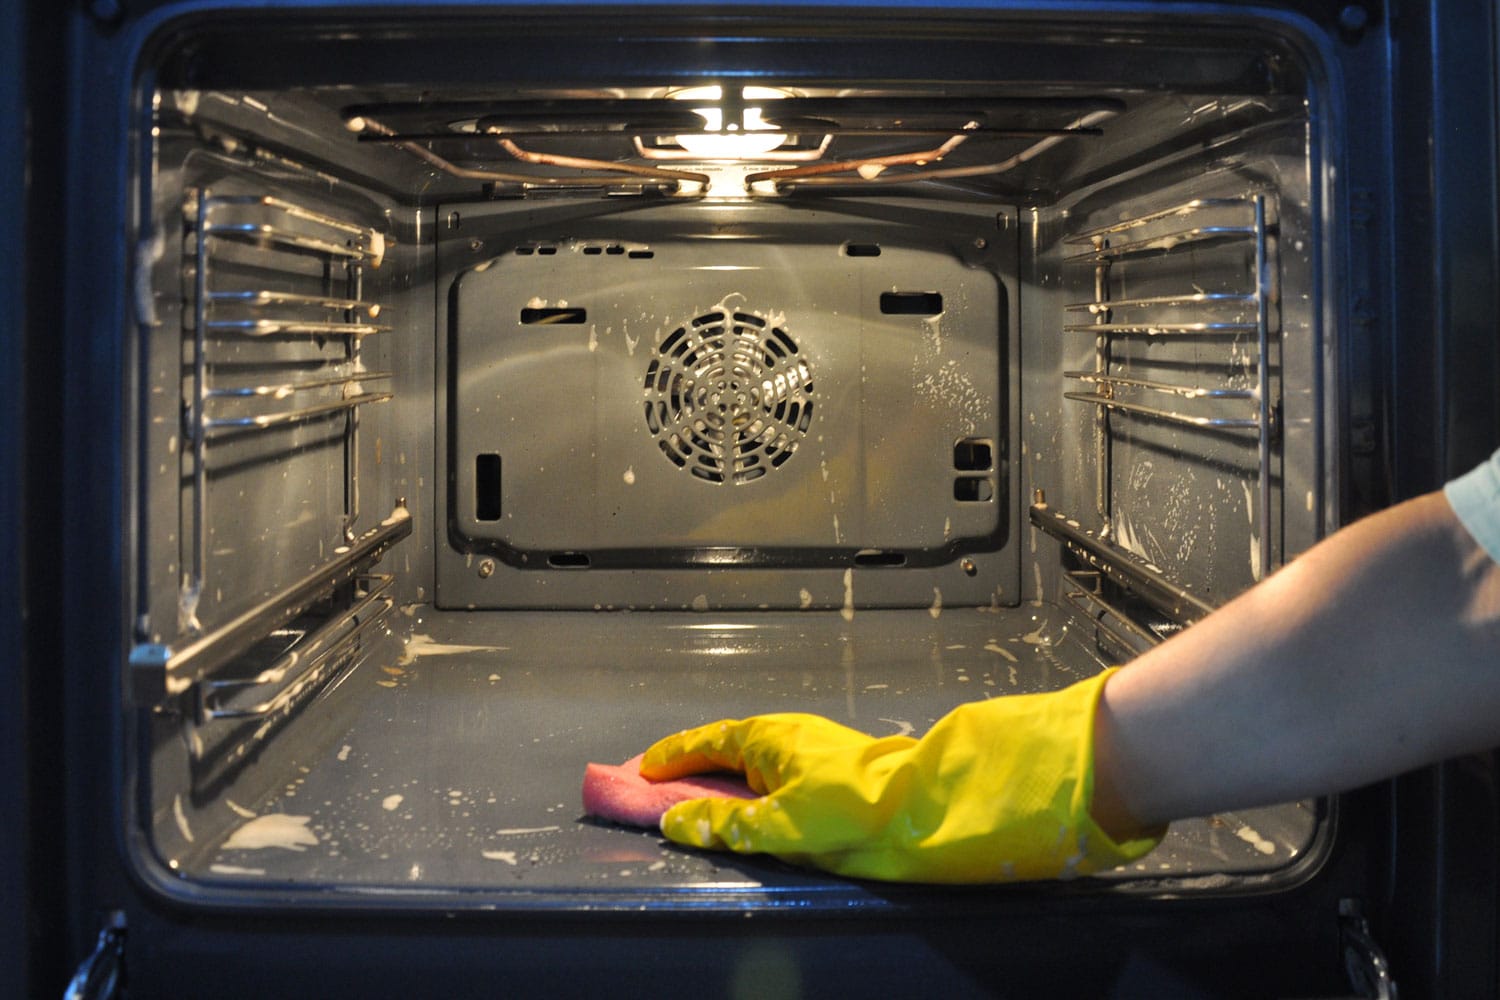 Cleaning the oven in the kitchen. hand in a yellow household glove out of focus on the background of the oven.
